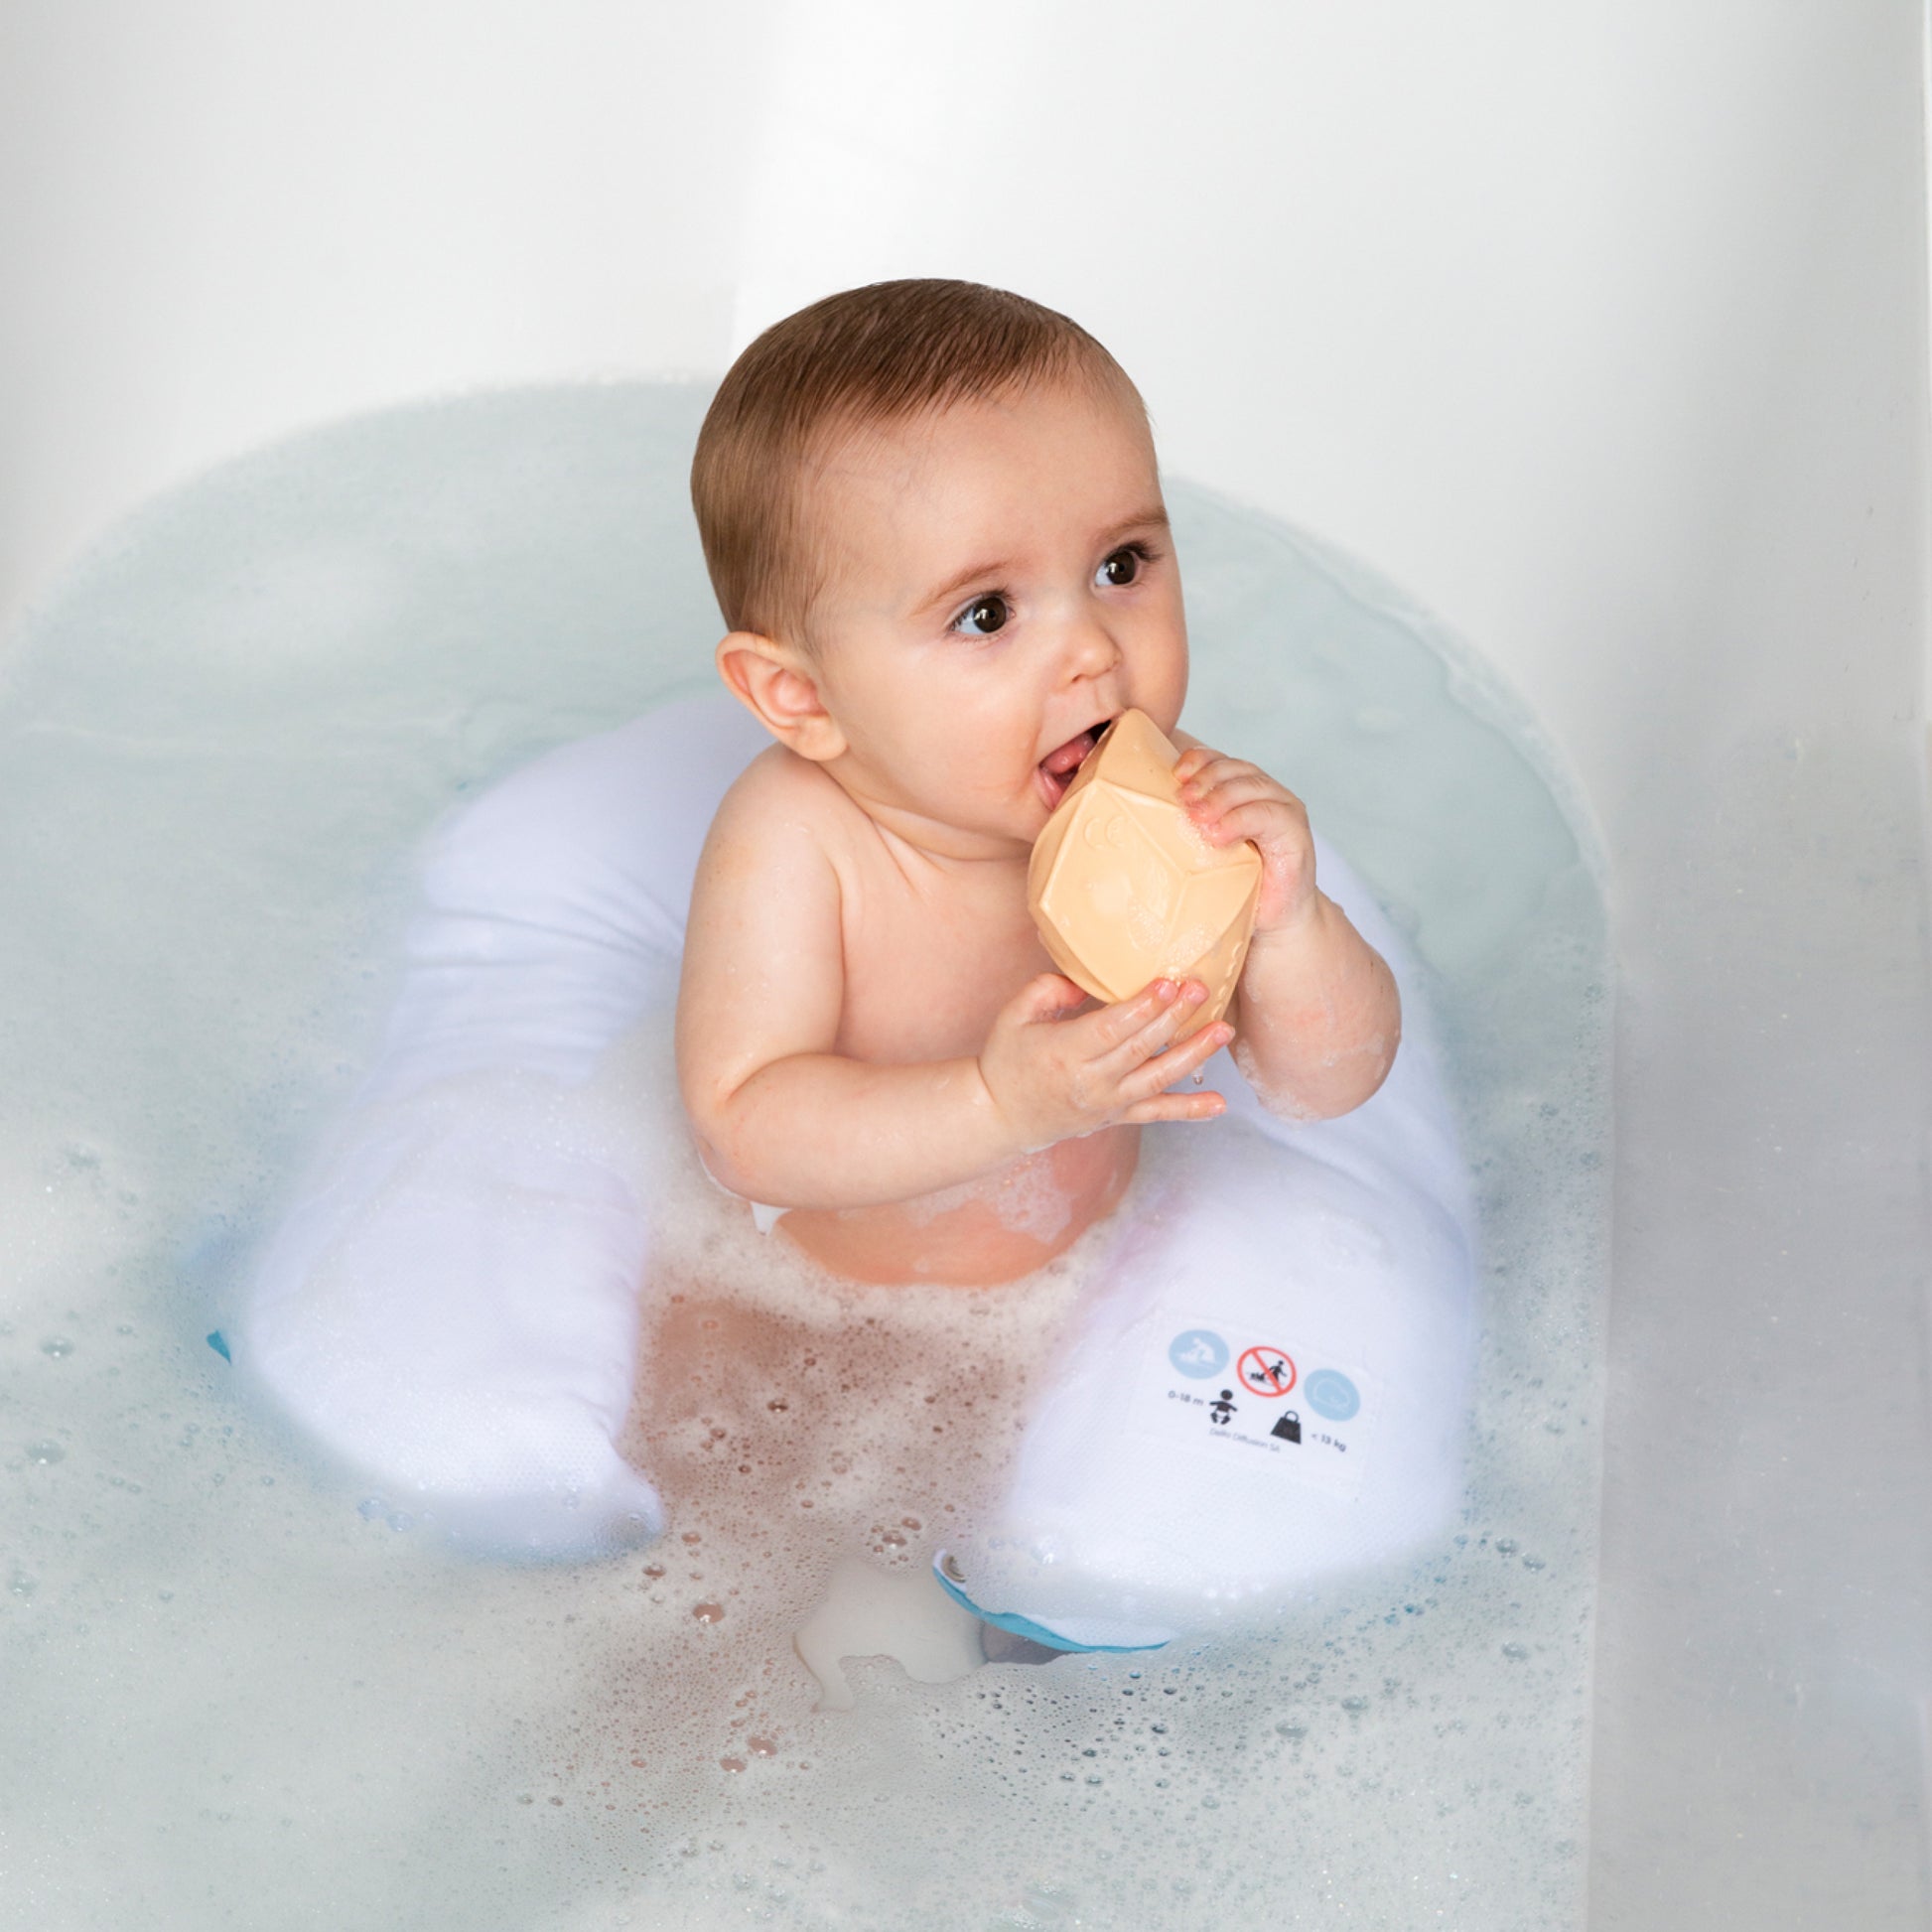 Soft bath cushion where your baby can comfortably and safly ly or